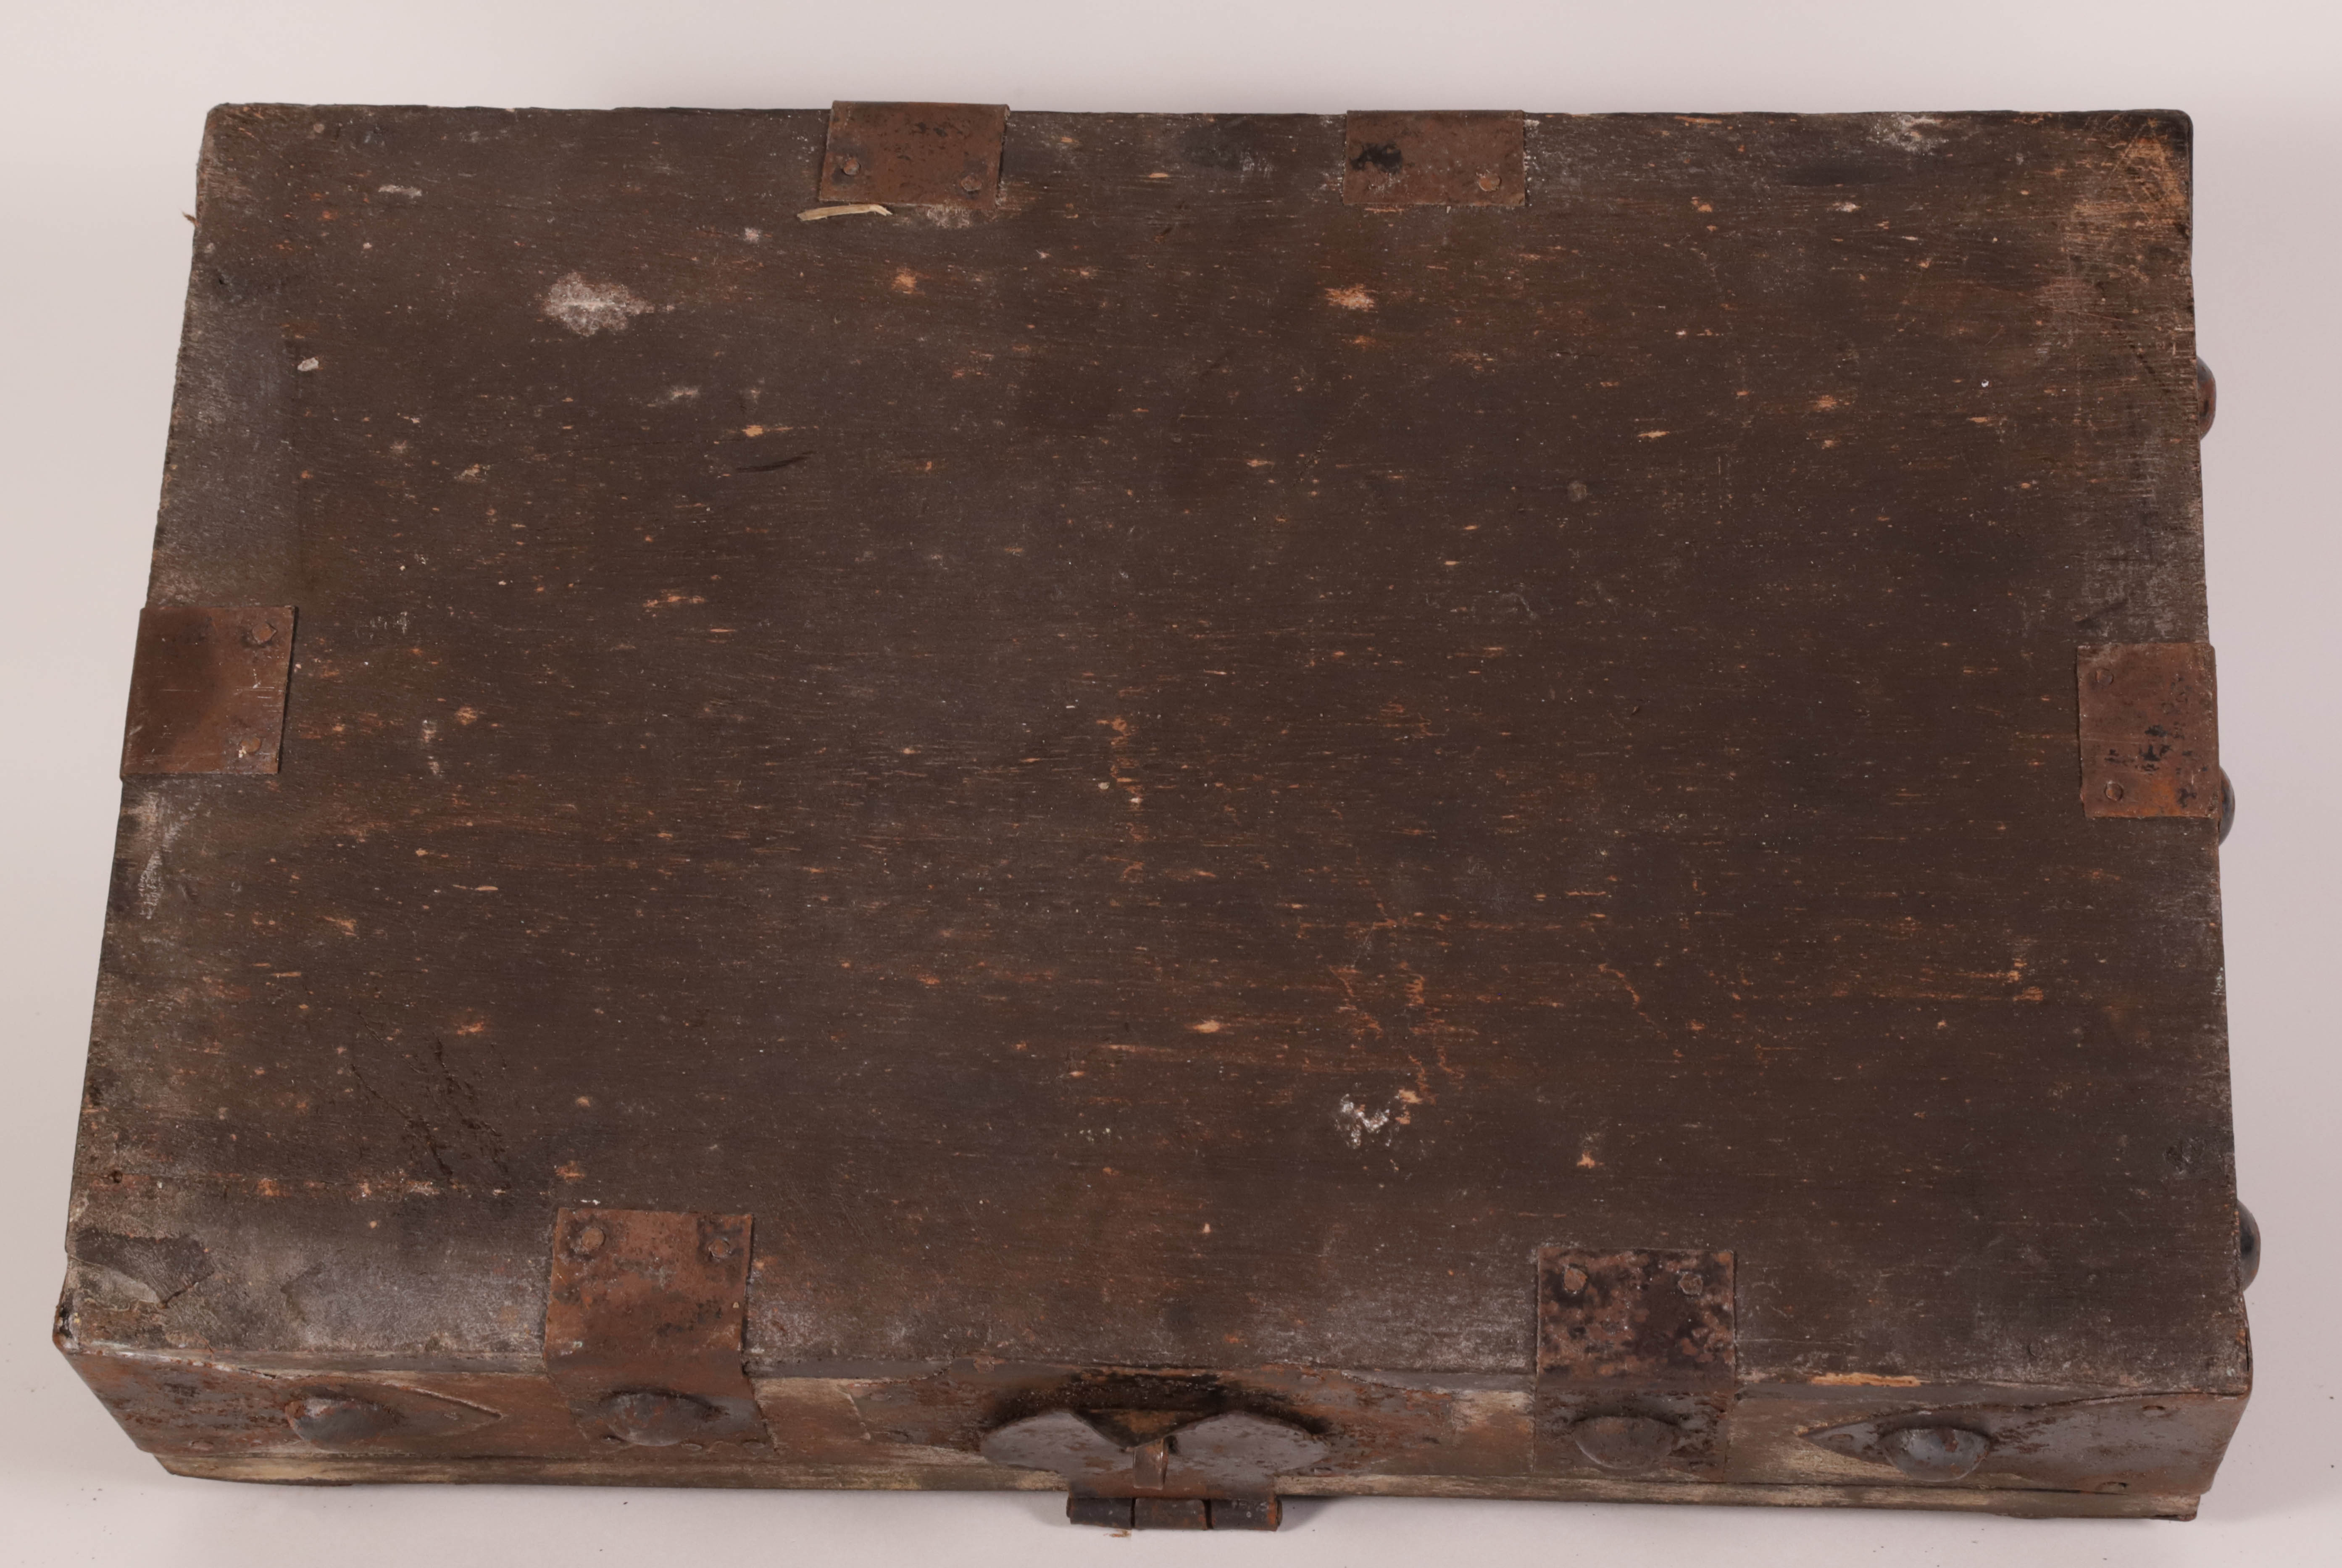 Antique Iron Strapped and Studded Oak Carrying Box